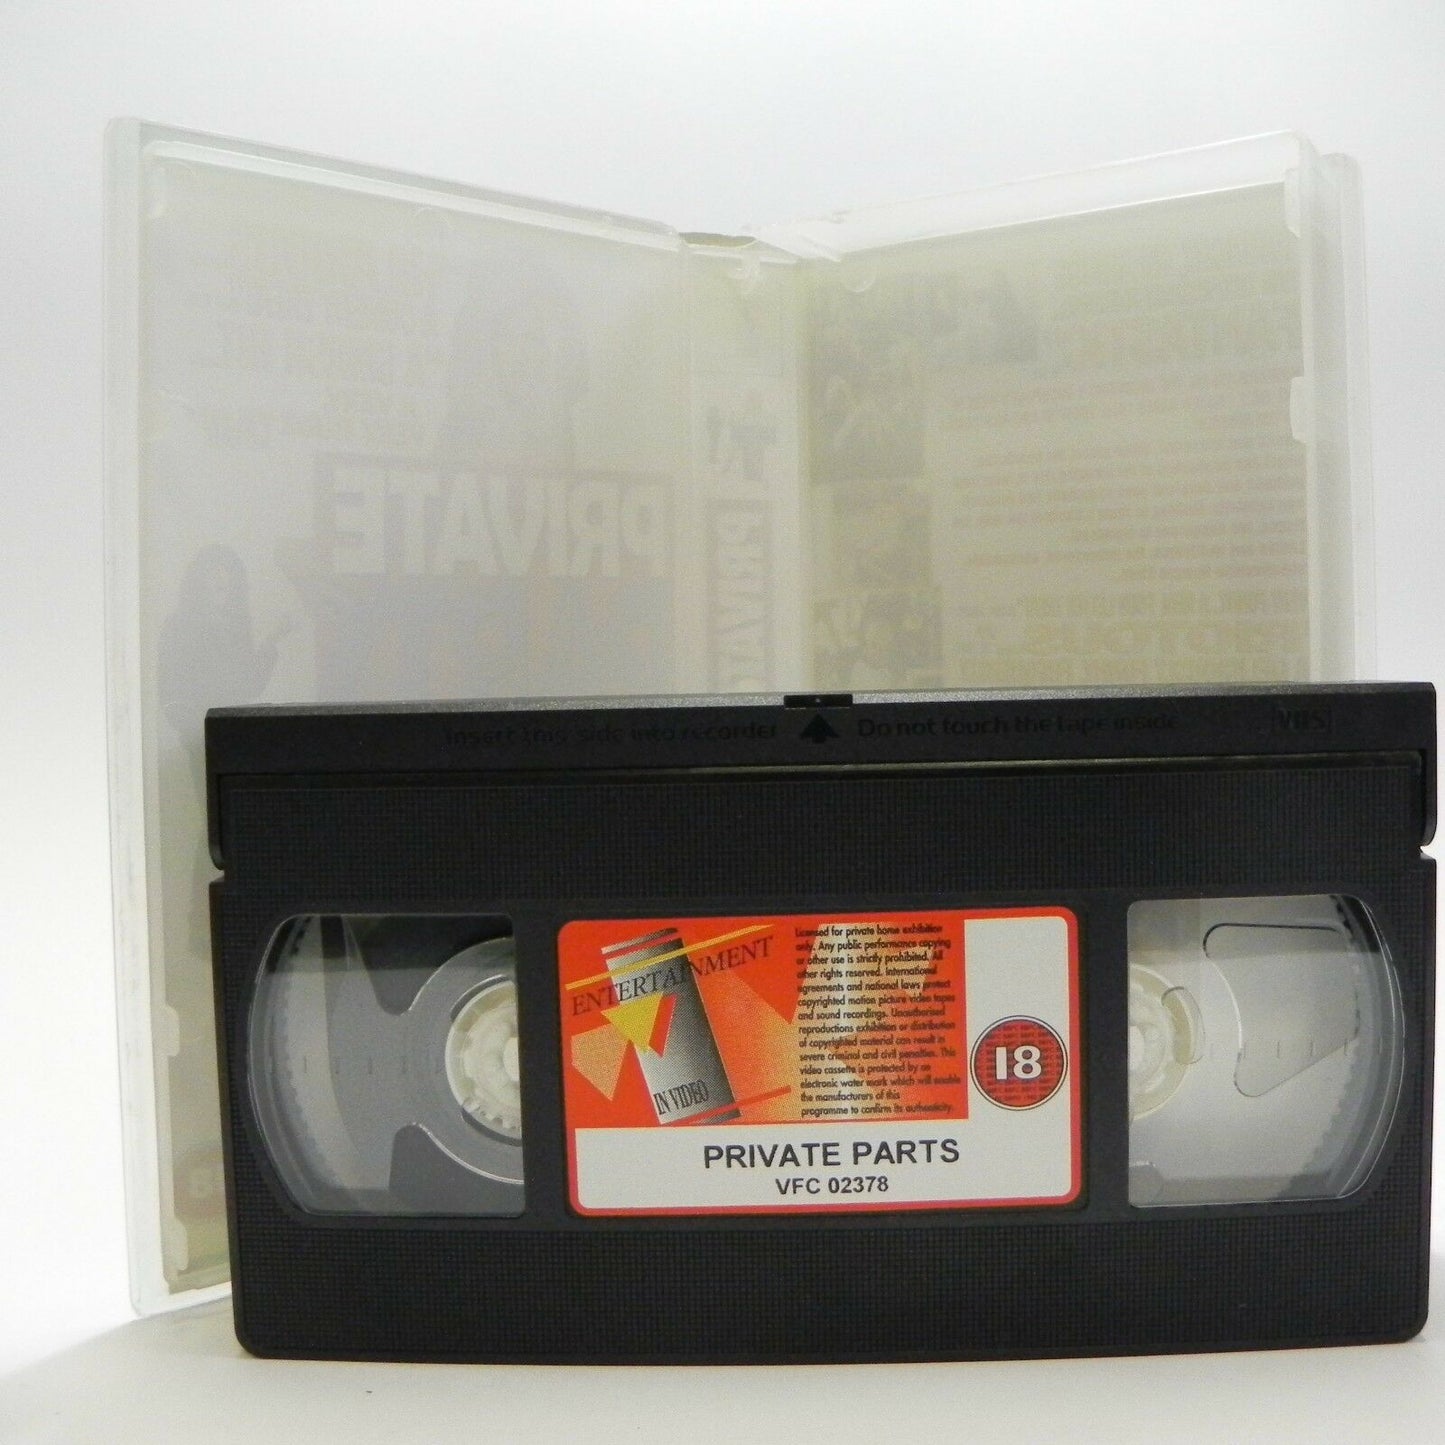 Private Parts: (1997) Biography - Howard Stern Story - Comedy/Drama - Pal VHS-